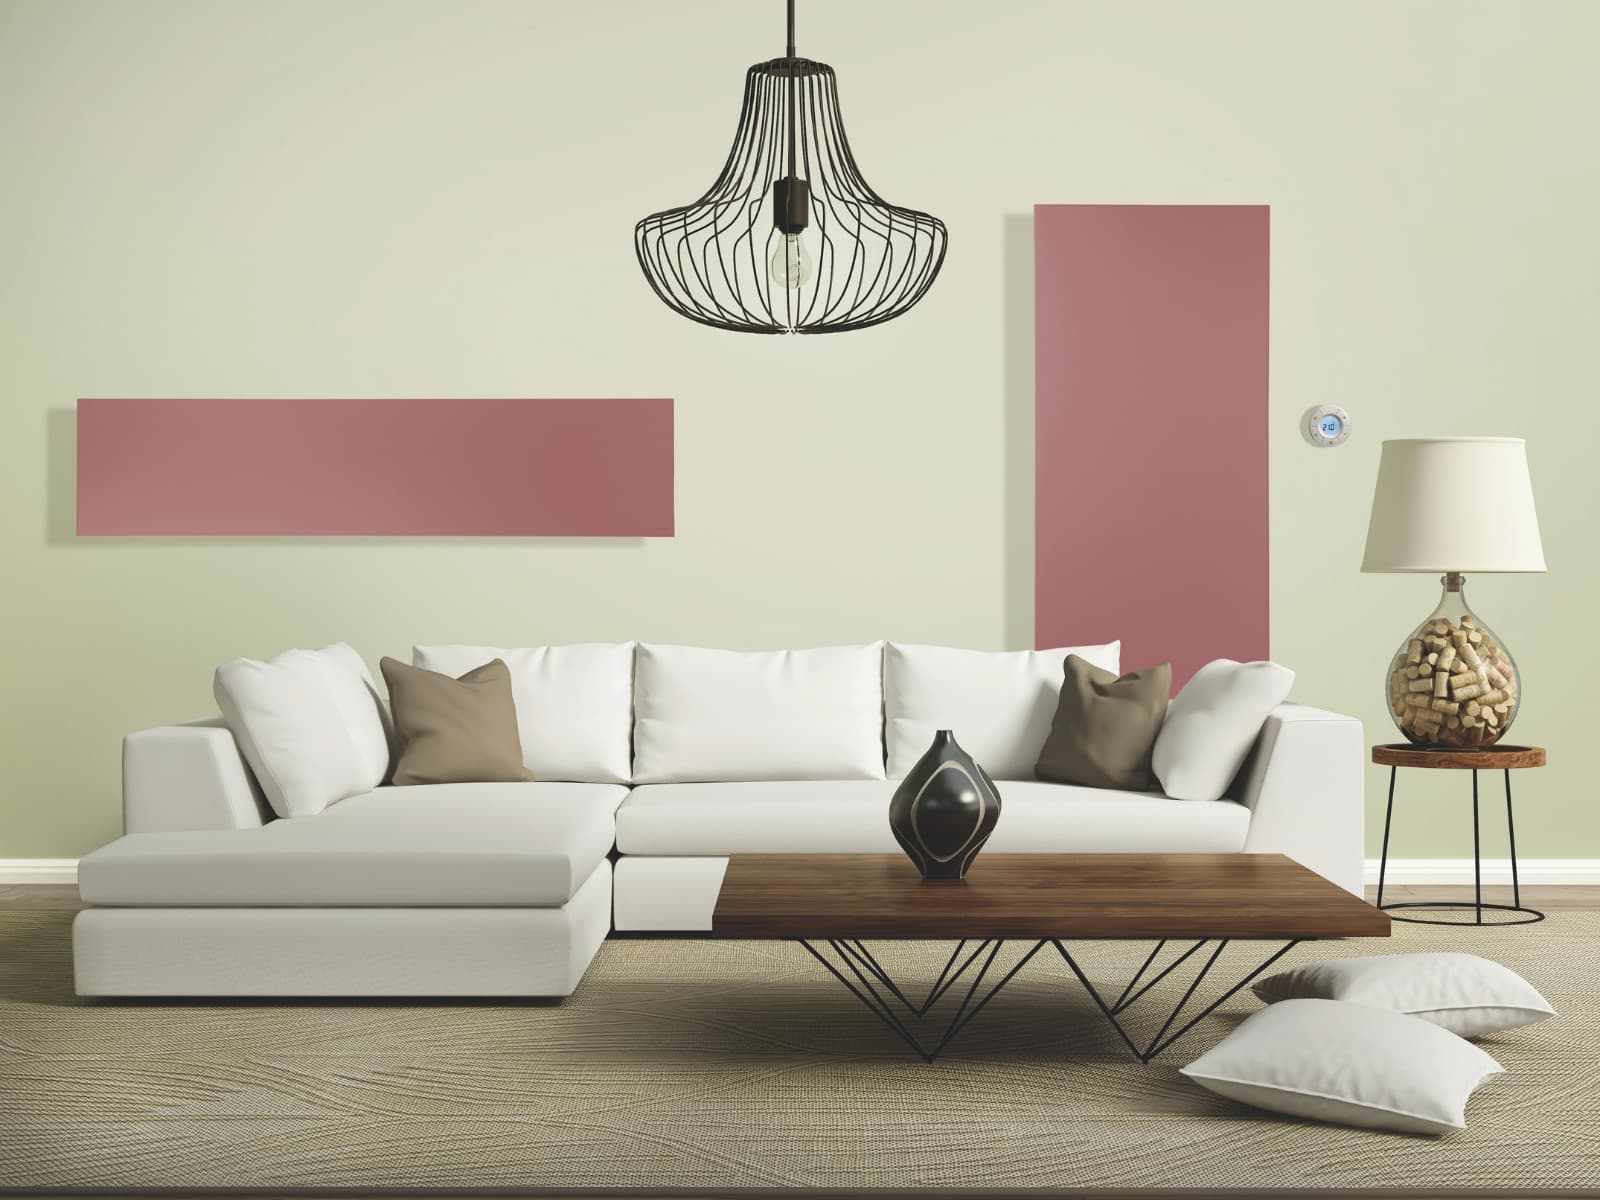 Marmo electric radiators warm and enhance your living space